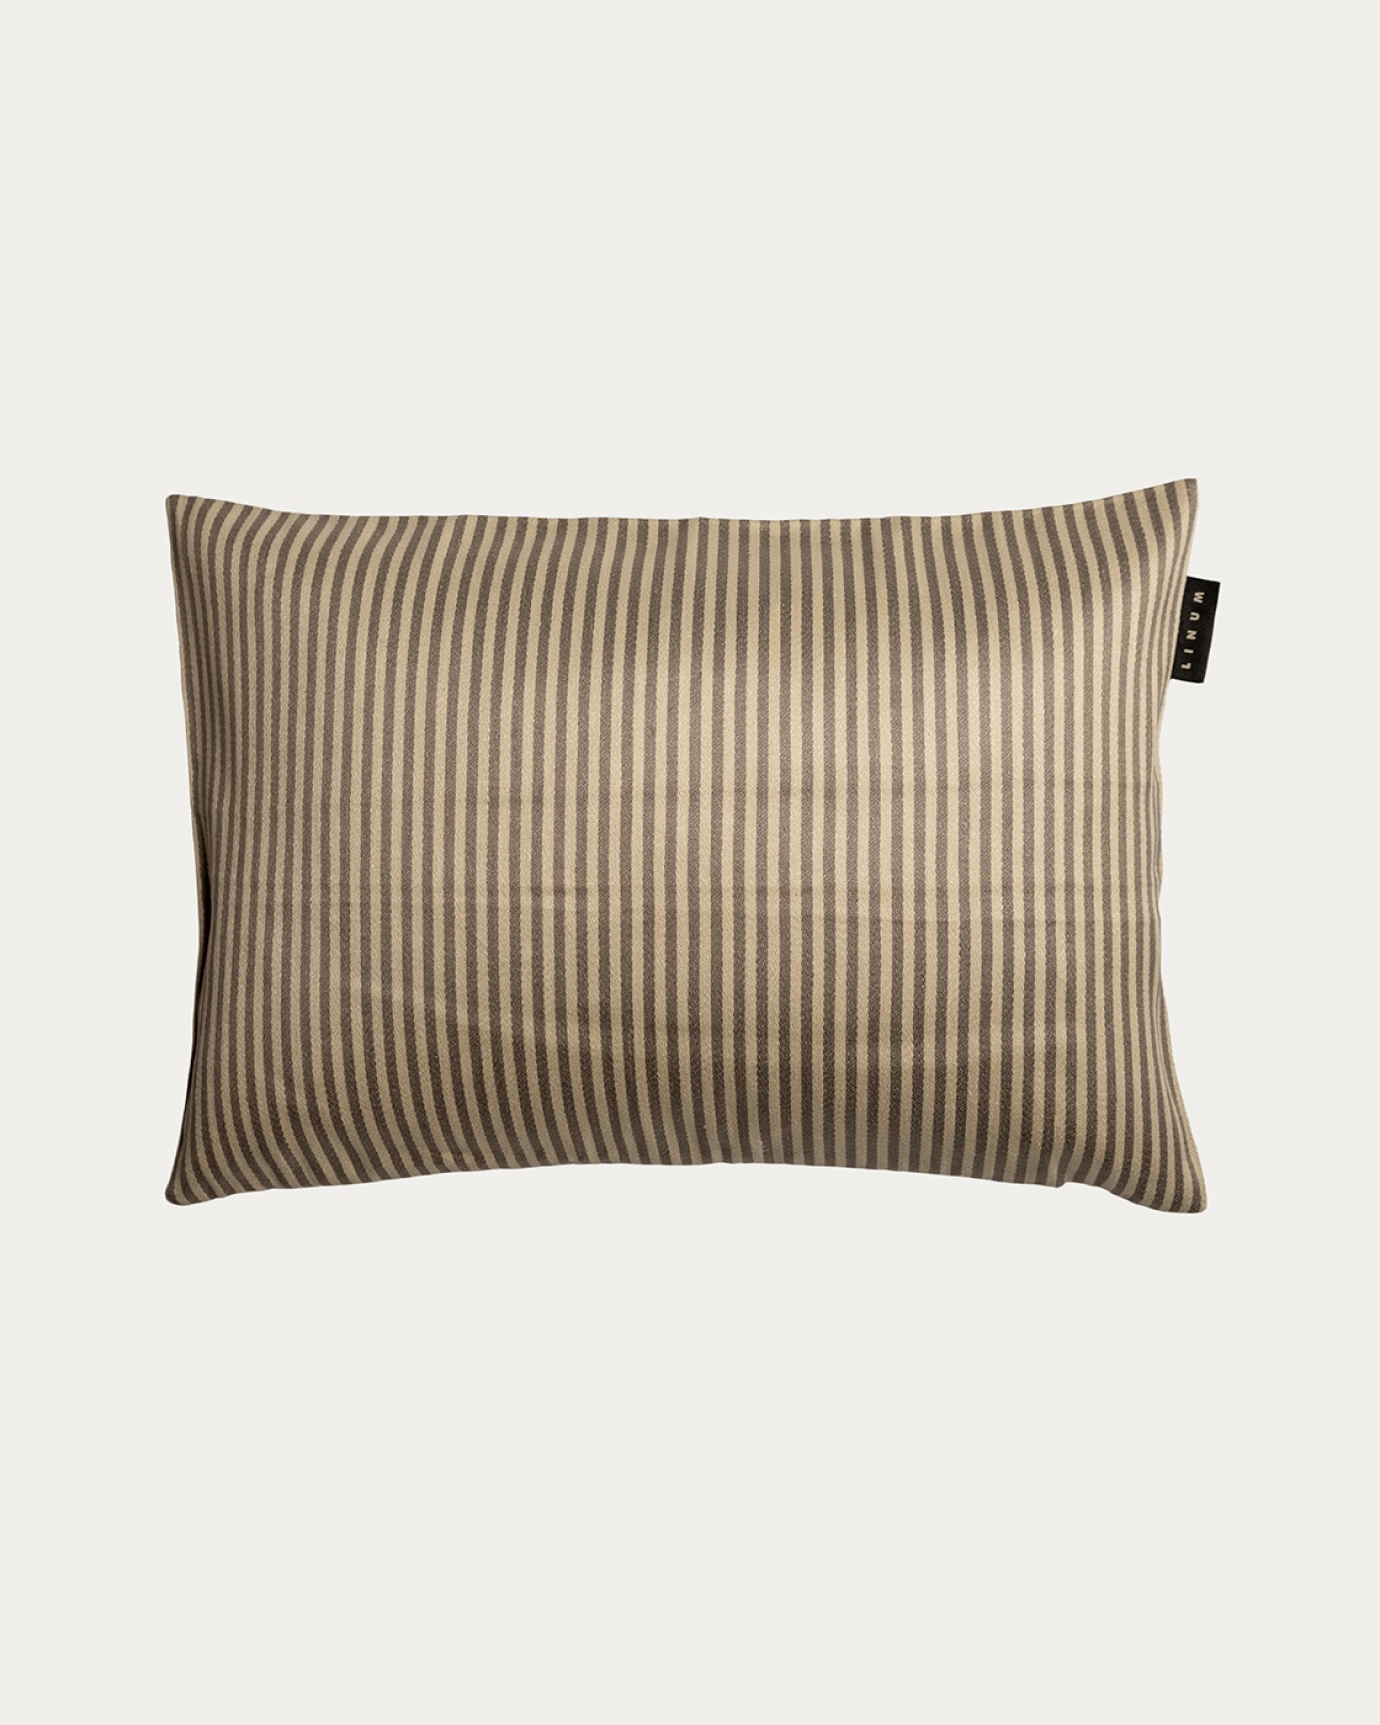 Product image mole brown CALCIO cushion cover with thin stripes of 77% linen and 23% cotton from LINUM DESIGN. Size 35x50 cm.